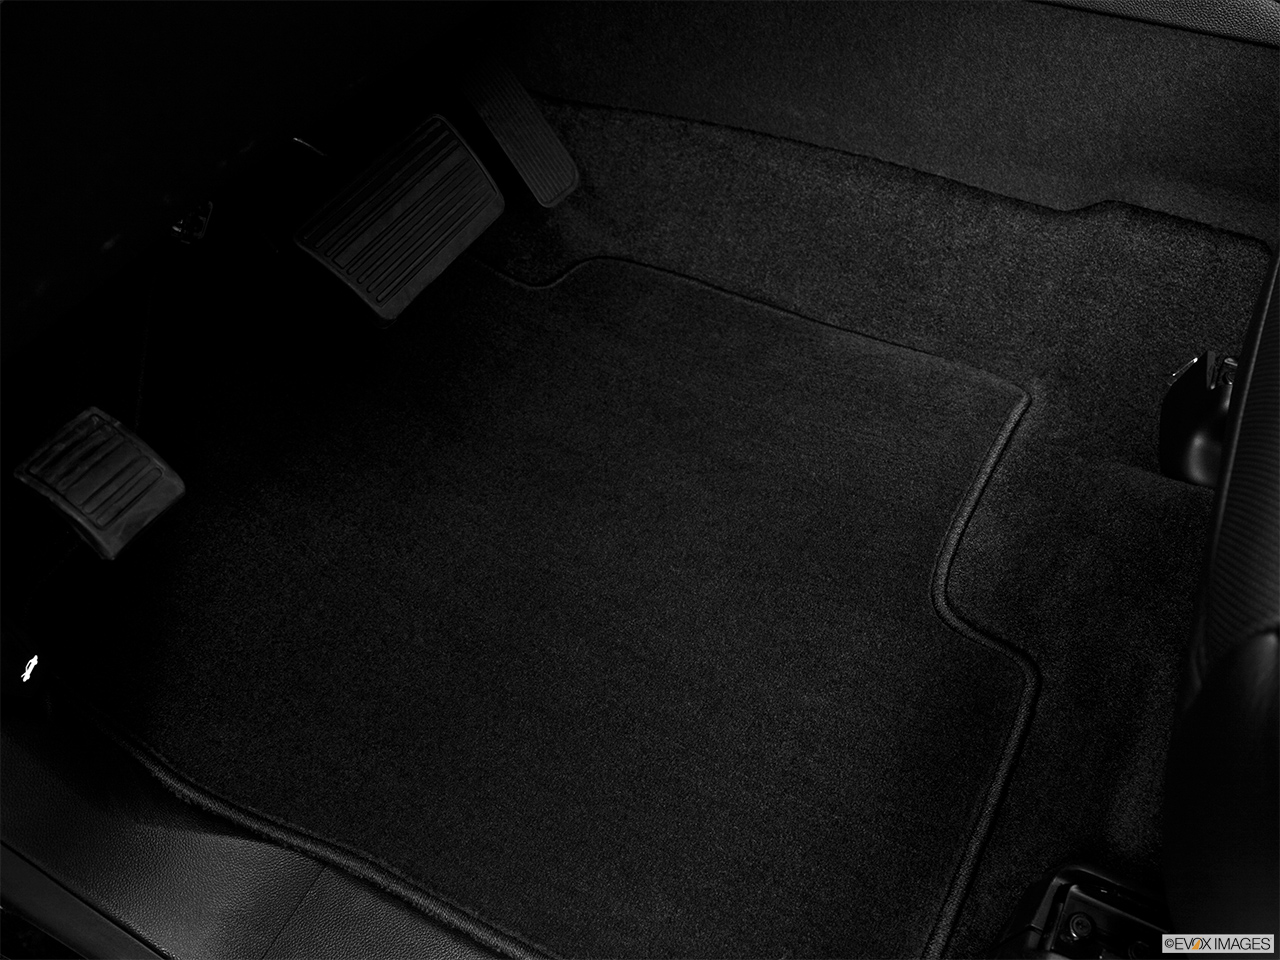 2013 Cadillac Escalade Hybrid Platinum Driver's floor mat and pedals. Mid-seat level from outside looking in. 